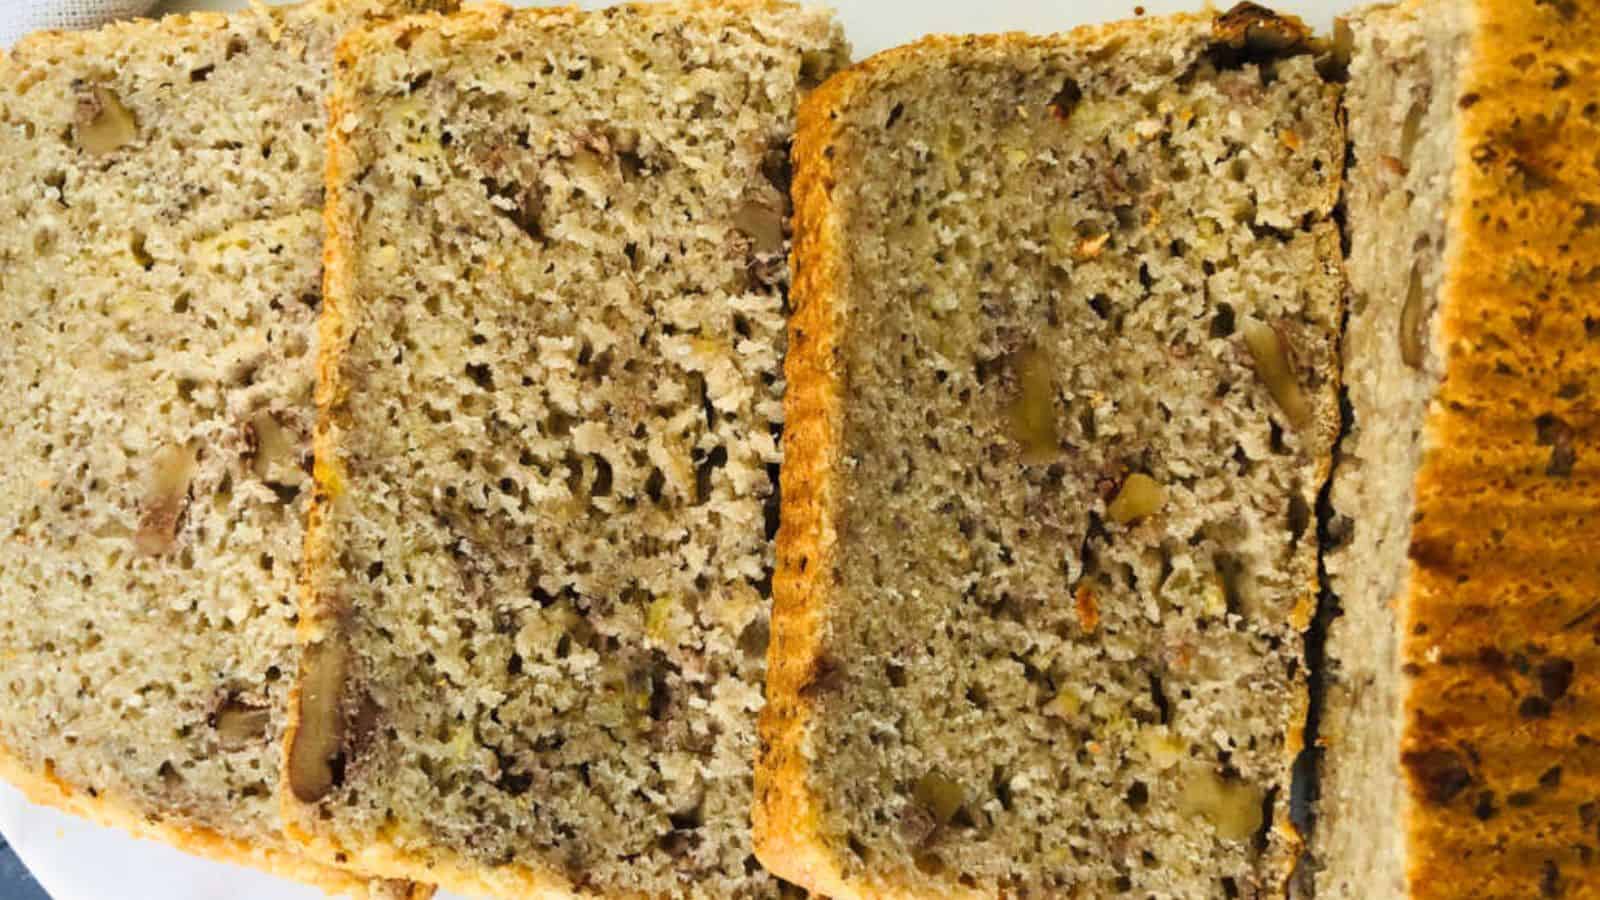 Four slices of nut bread are arranged side by side, showing a dense texture with visible pieces of nuts throughout.